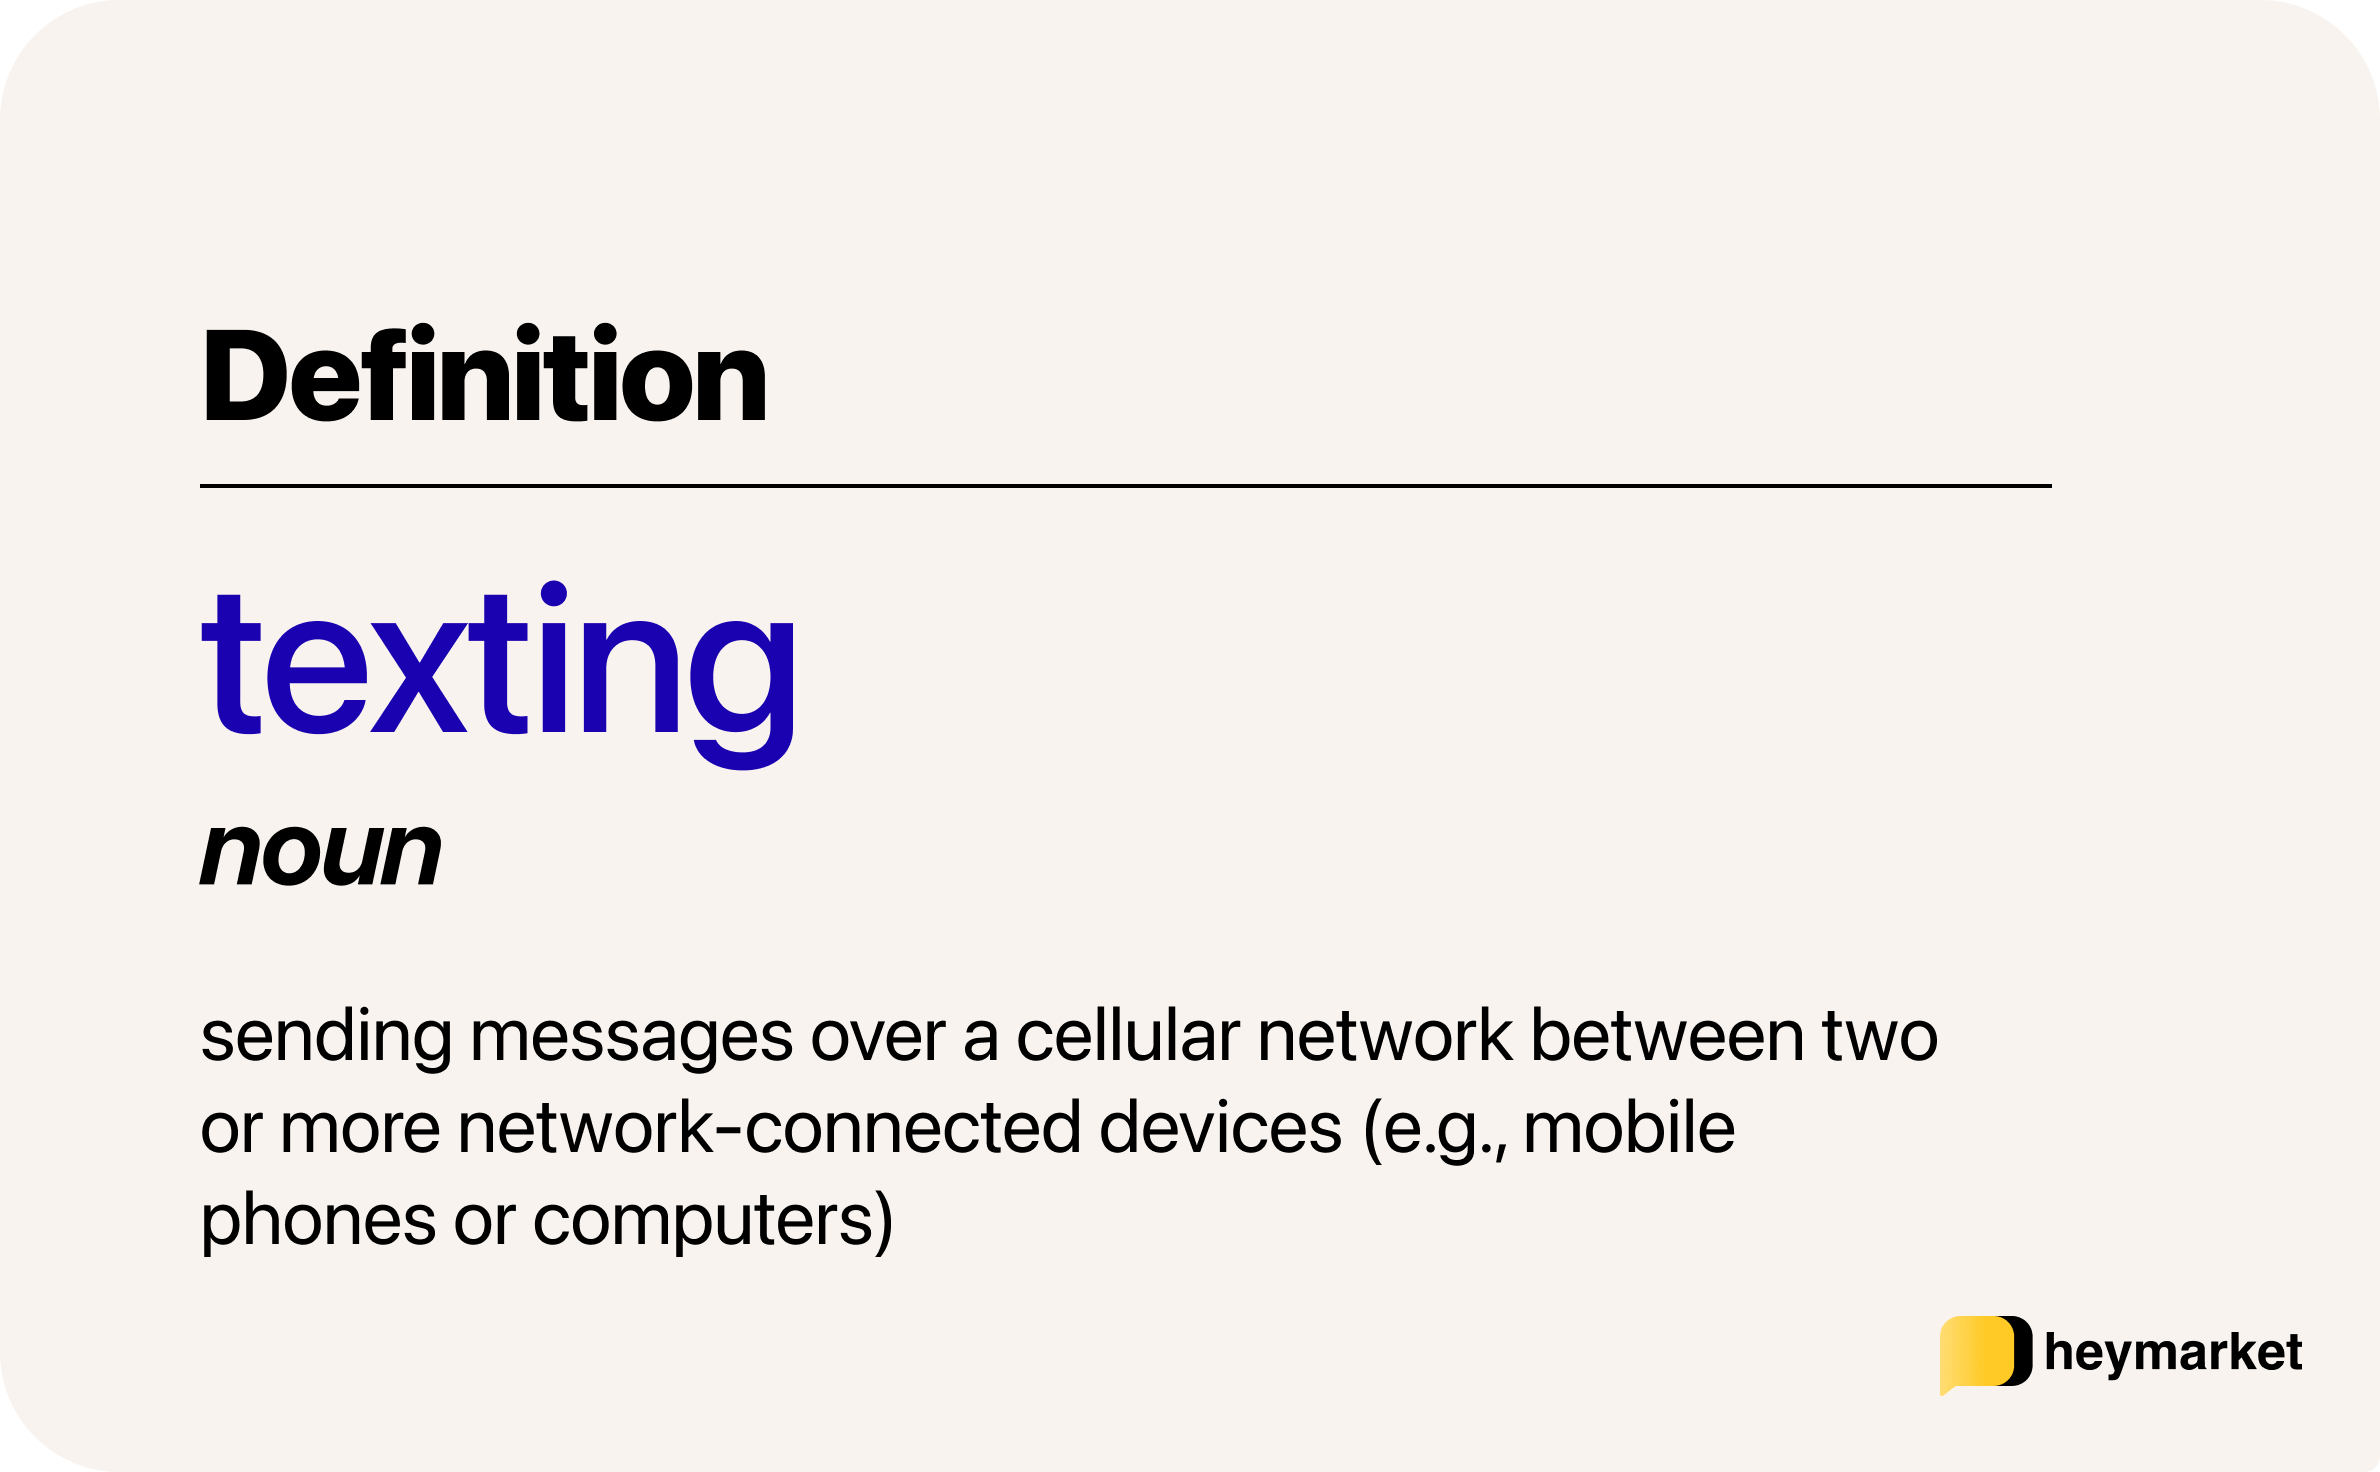 Definition "texting" (noun) - sending messages over a cellular network between two or more network-connected devices (e.g., mobile phones or computers).